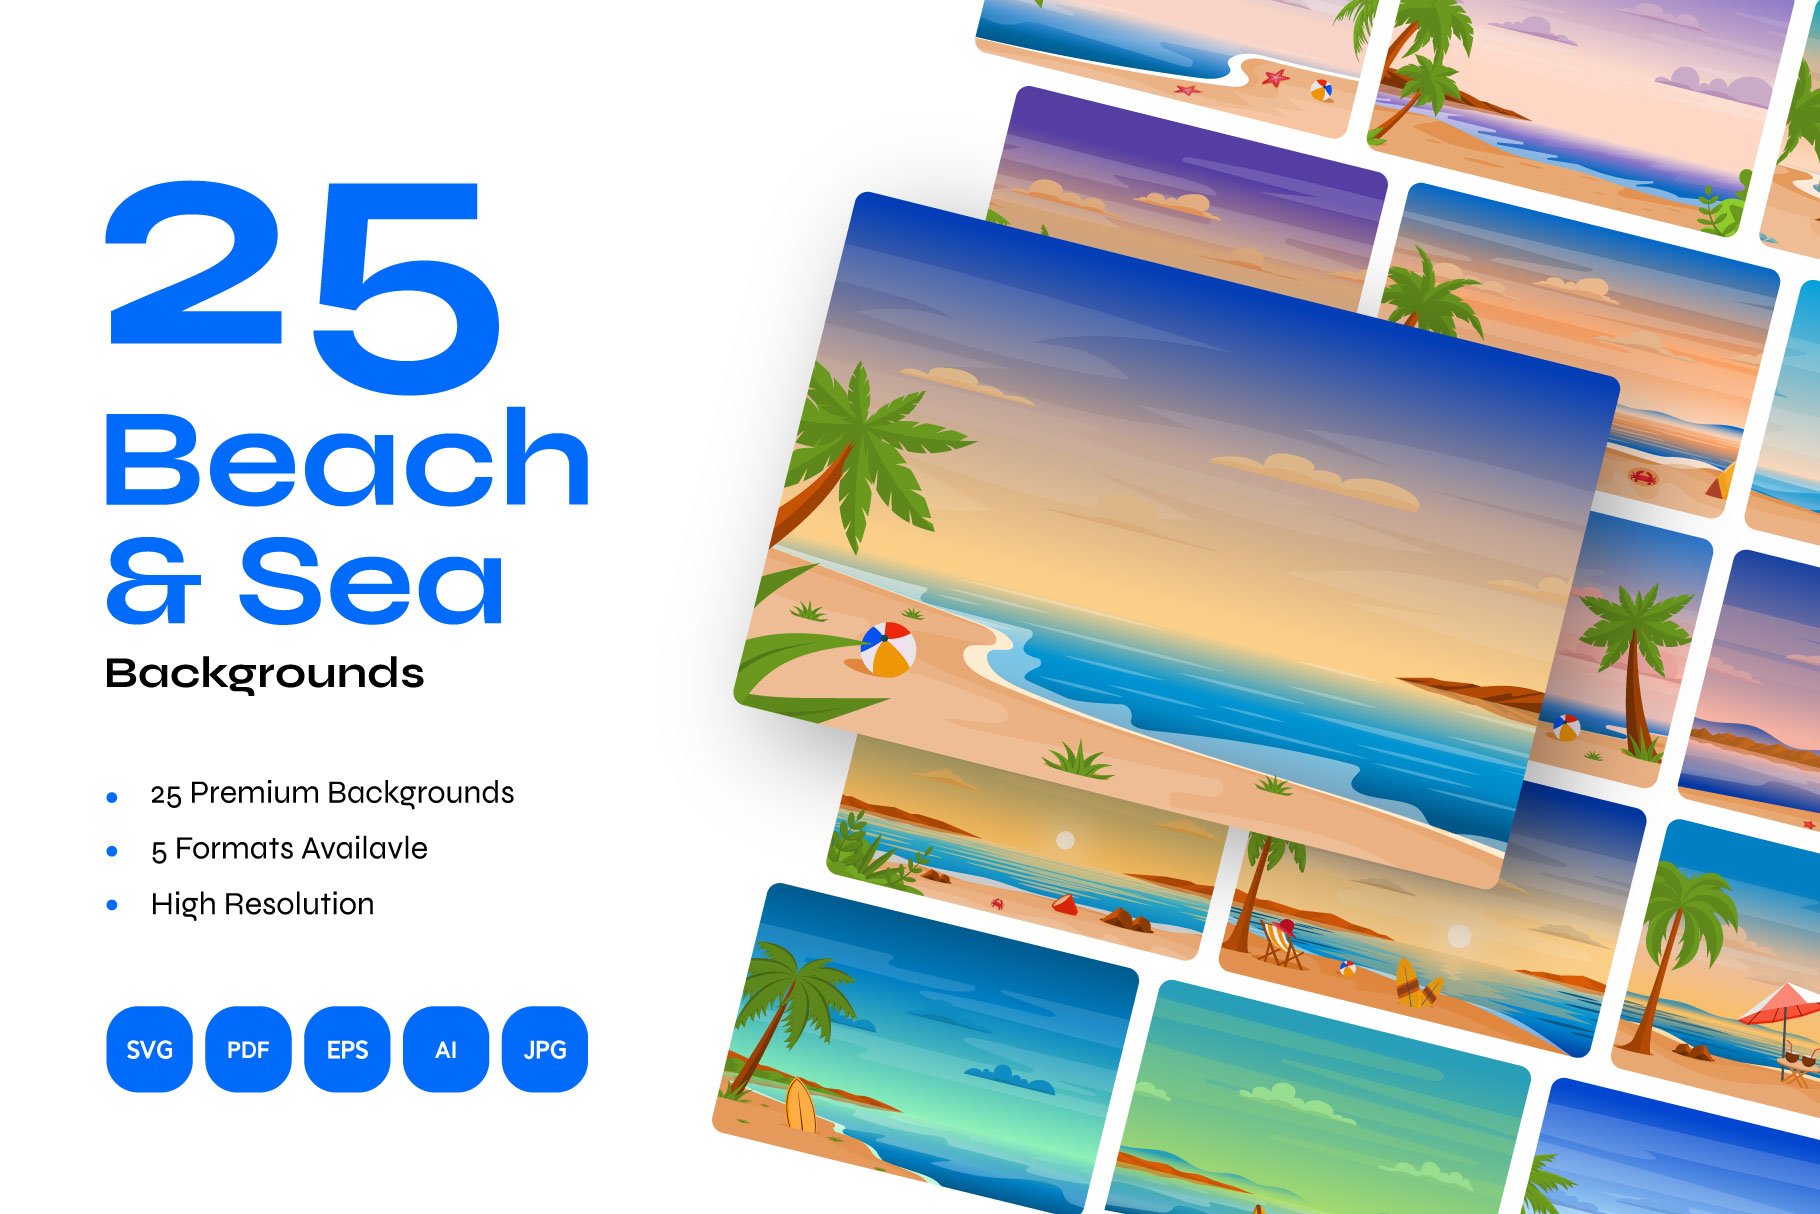 25 Sea and Beach Backgrounds cover image.